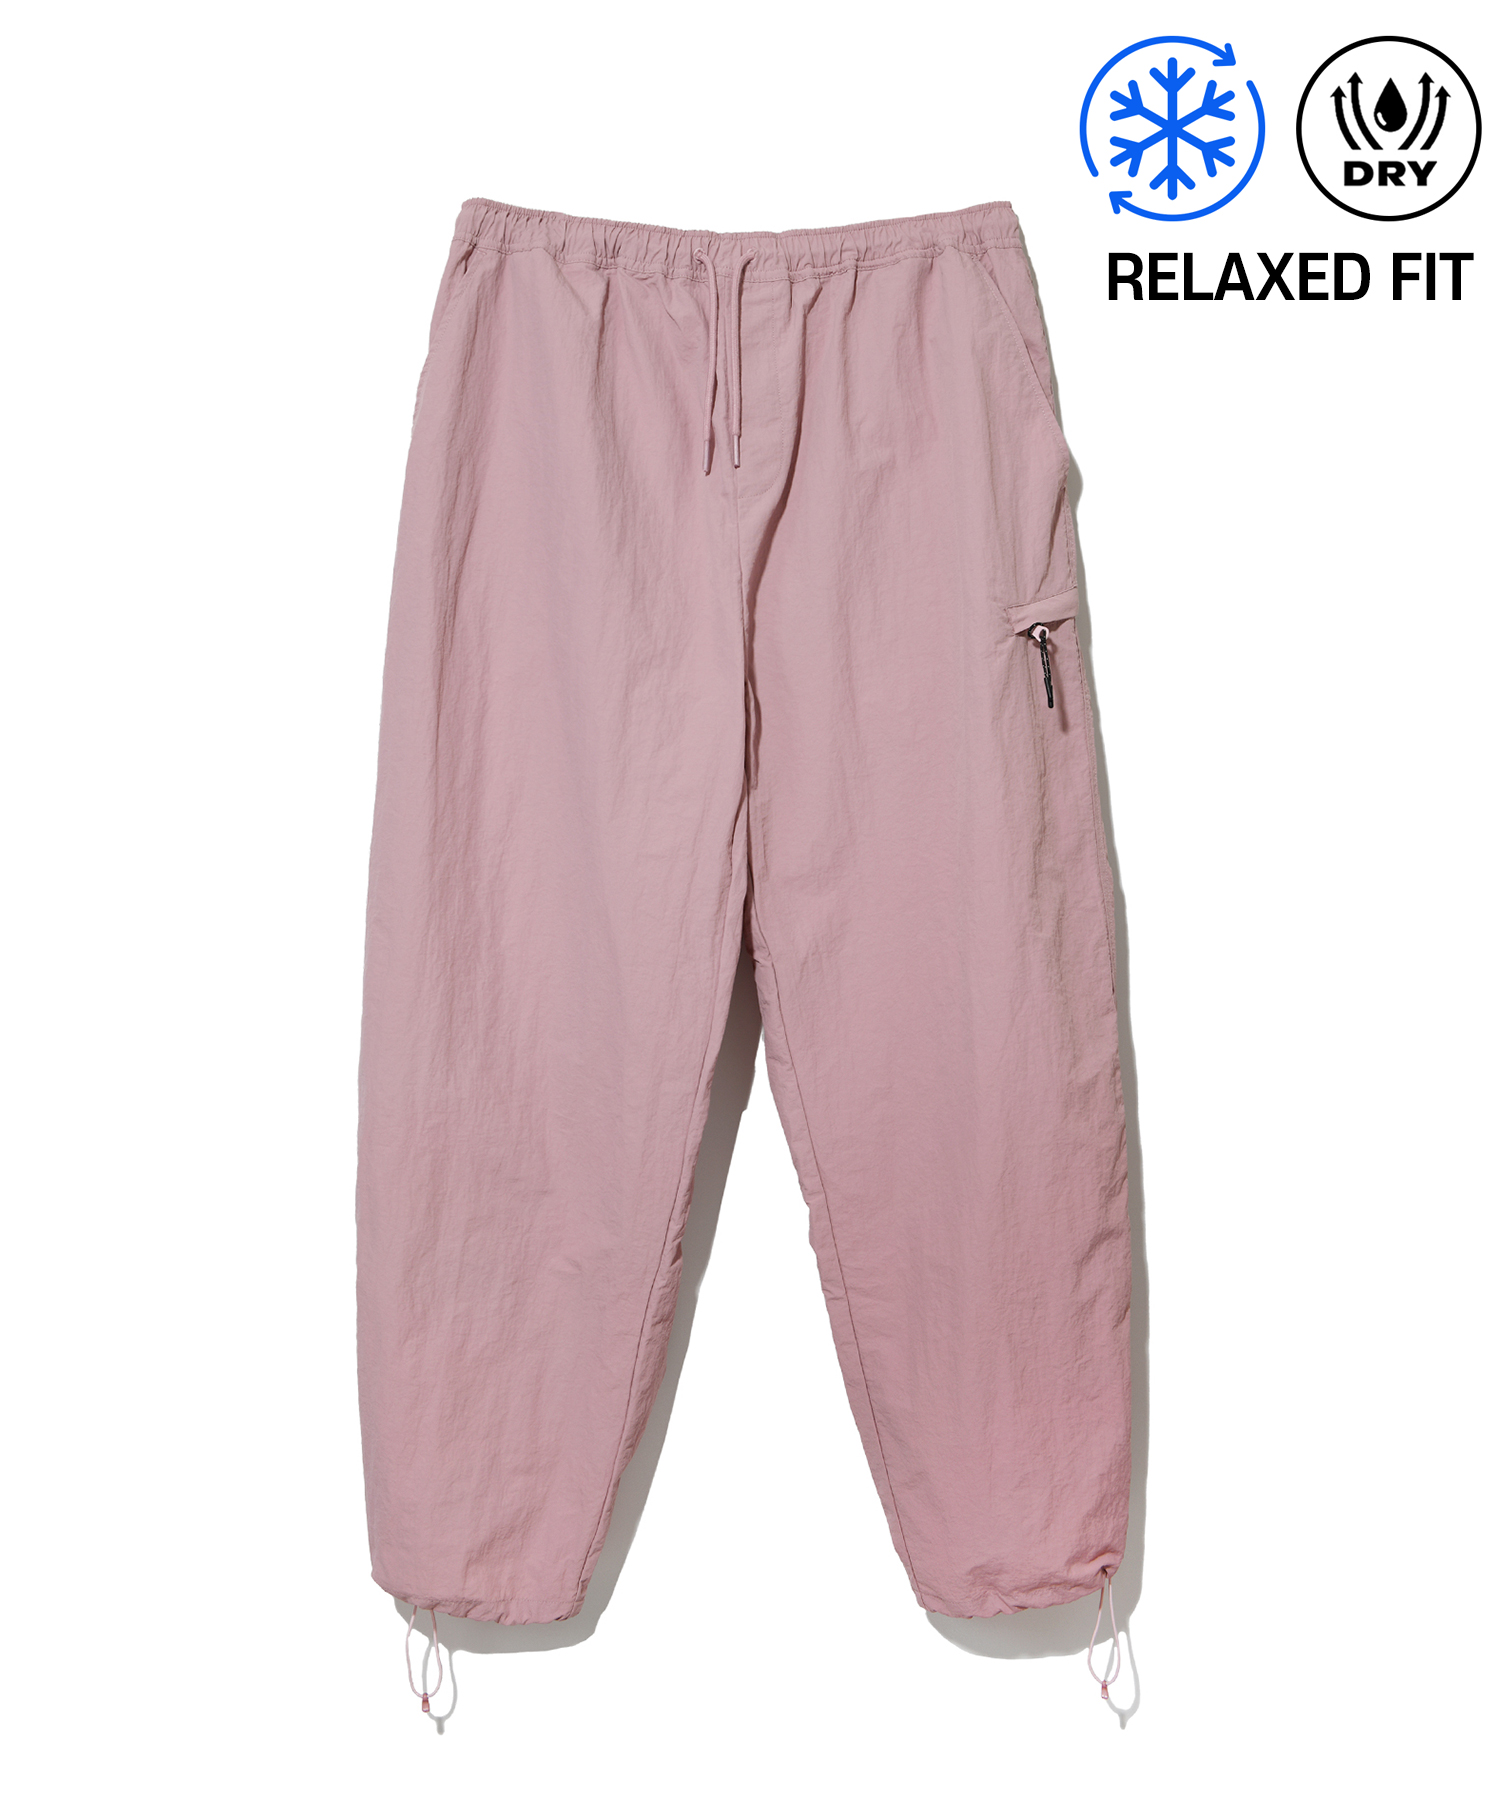 [ONEMILE WEAR] NYLON RELAXED FIT CLIMBING PANTS VTG PINK